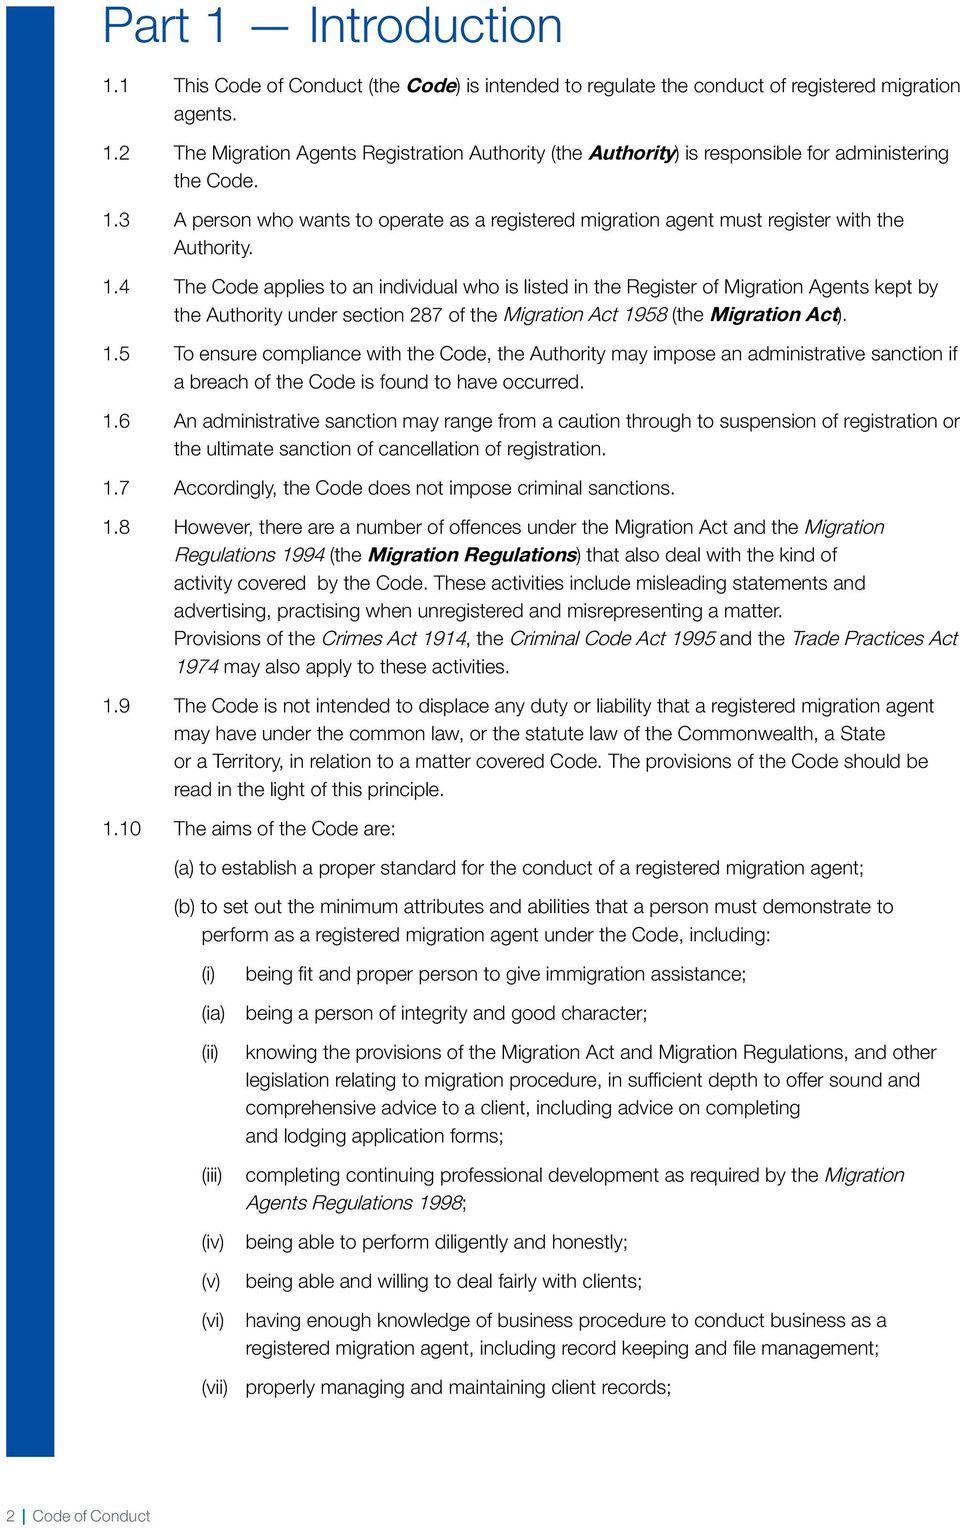 4 The Code applies to an individual who is listed in the Register of Migration Agents kept by the Authority under section 287 of the Migration Act 19